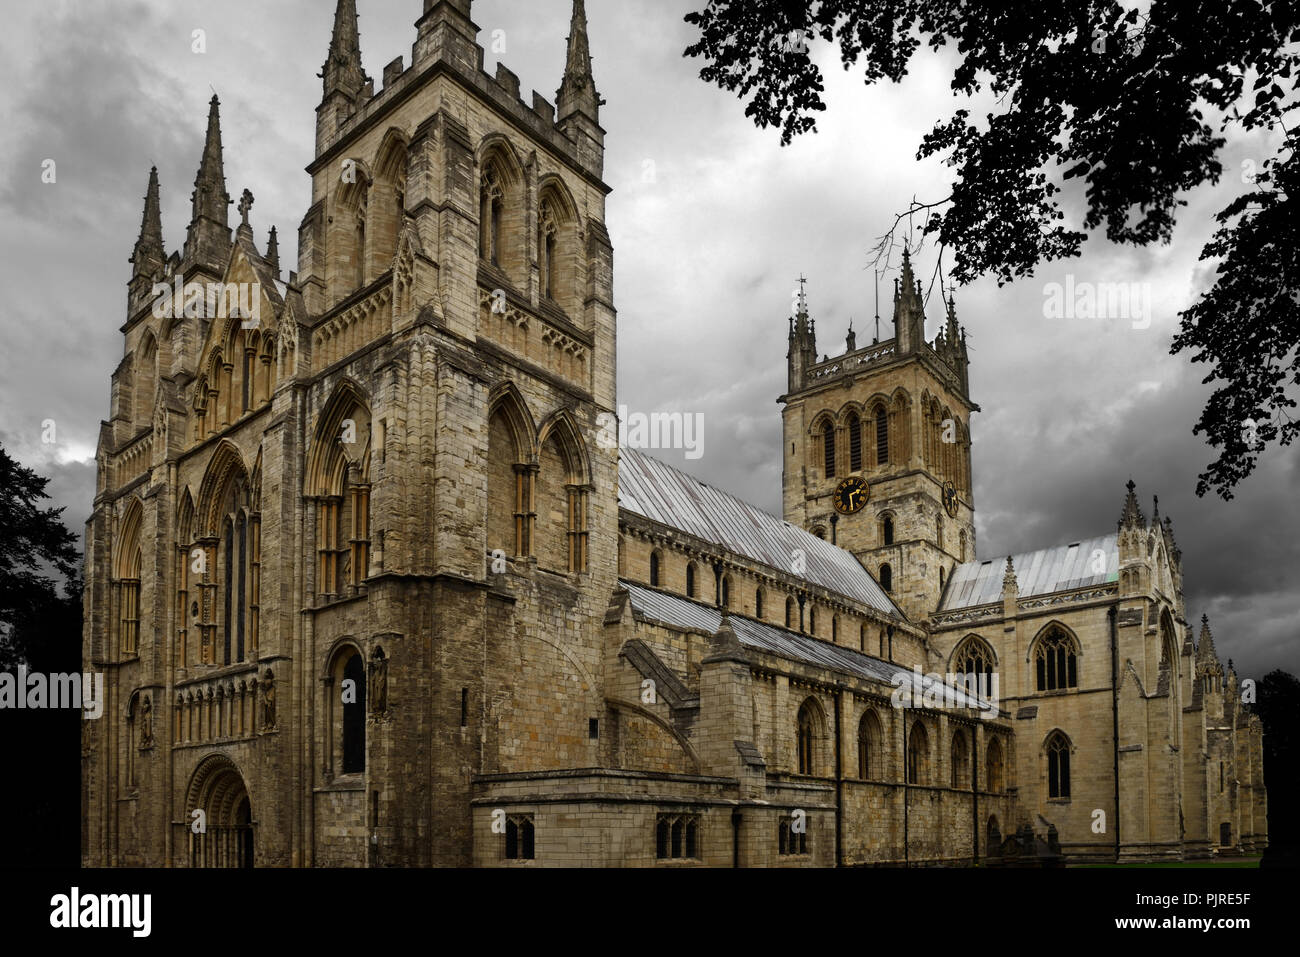 Selby Abbey, Selby, North Yorkshire, is a rare example of an abbey church of the medieval period. It's like something out of a Harry Potter movie. Stock Photo